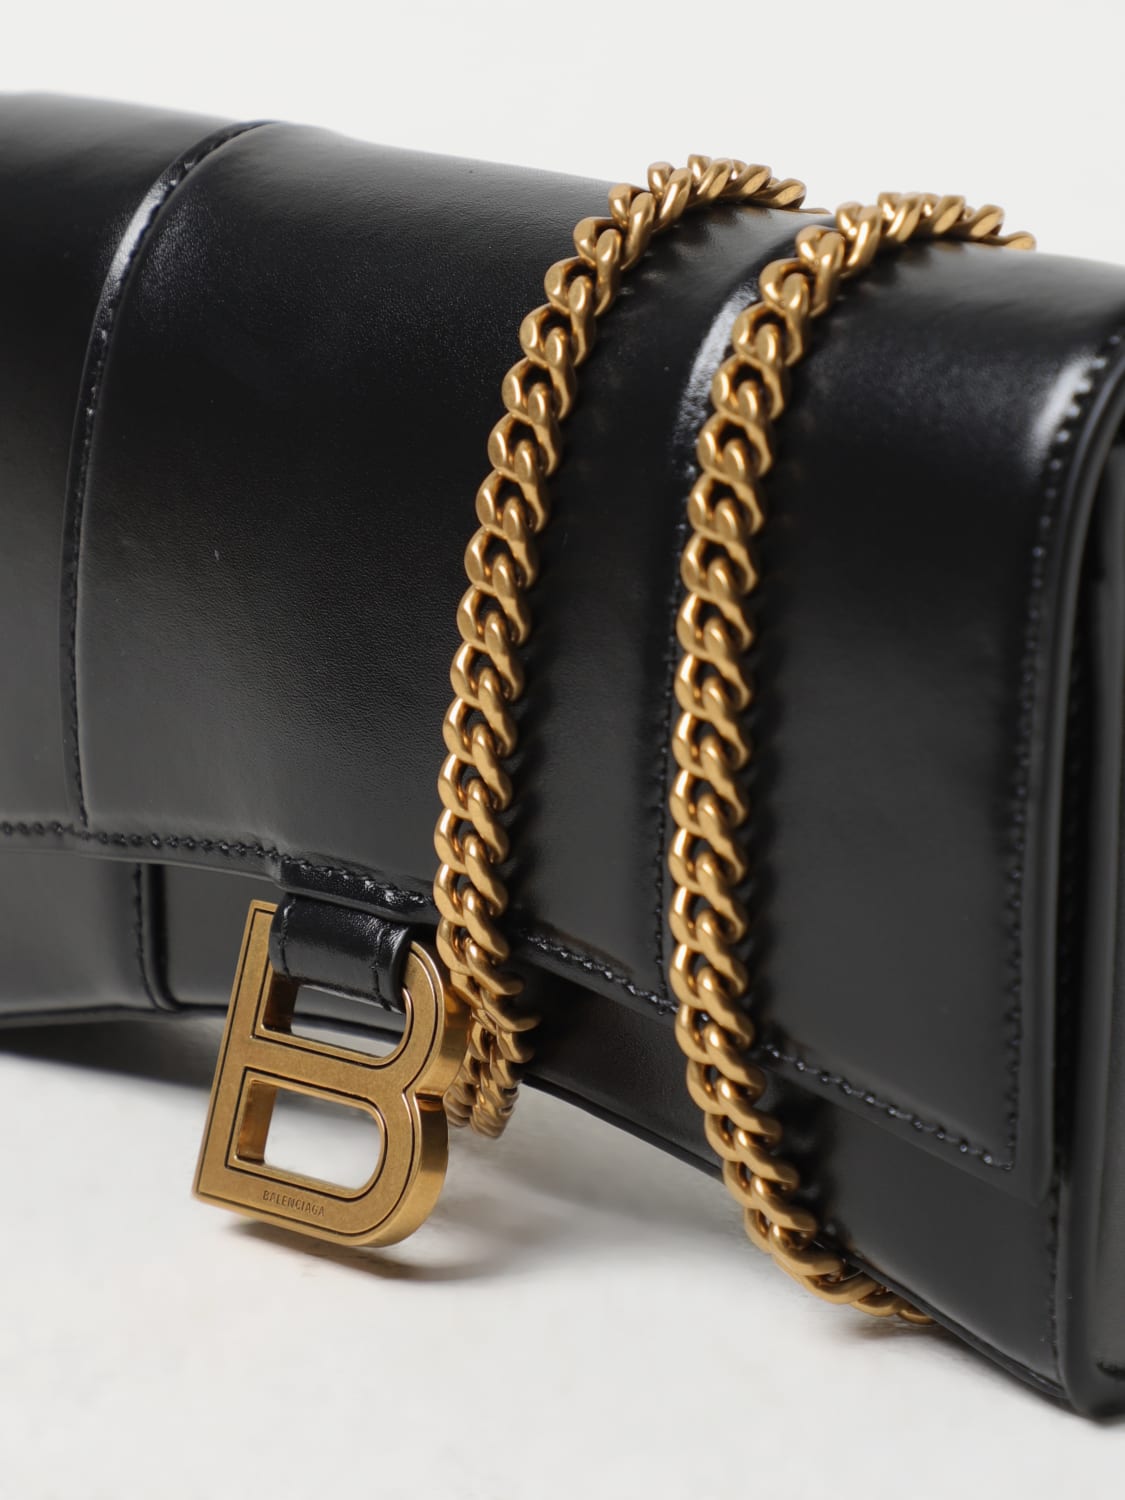 Balenciaga Hourglass Wallet with Chain